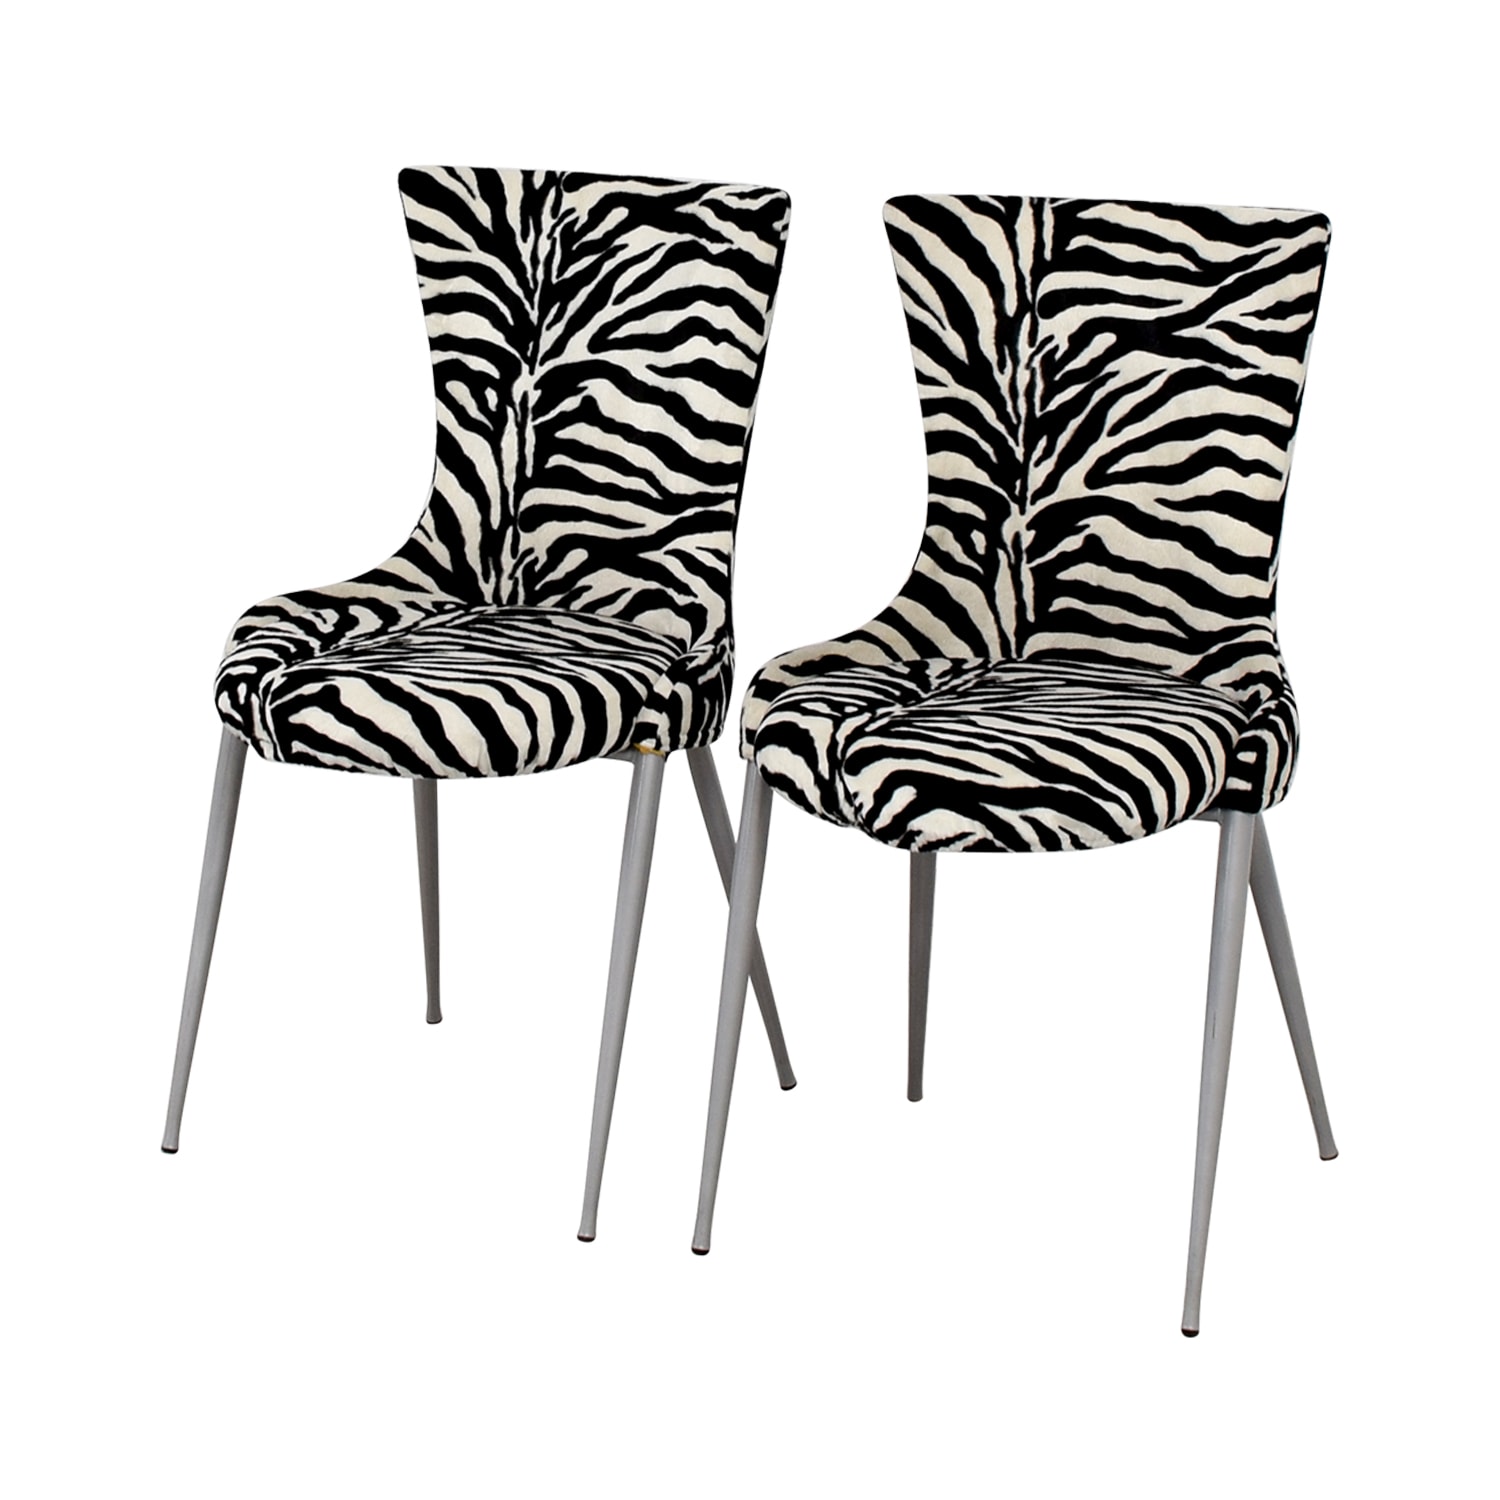 European Furniture Company Contemporary Zebra Dining Chairs / Dining Chairs